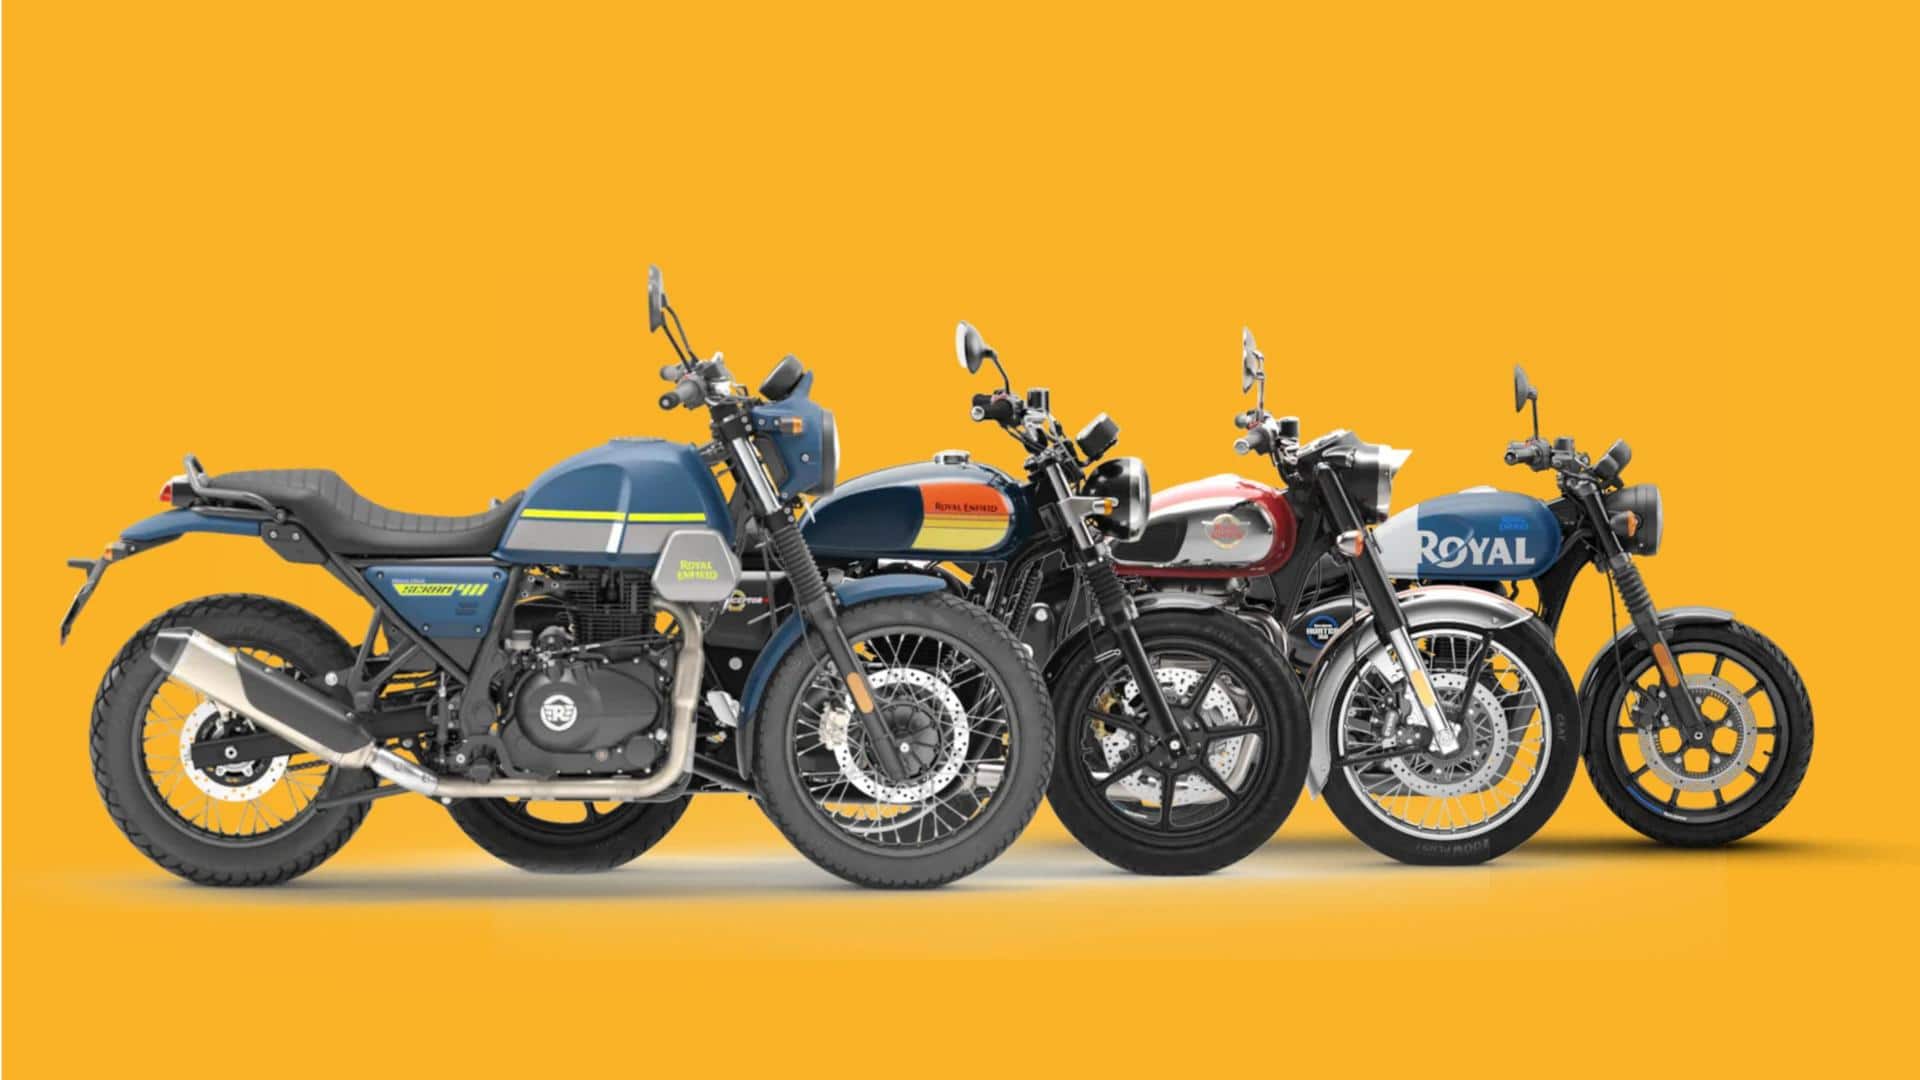 Upcoming bikes from Royal Enfield: ADV, bobber, roadster, and more